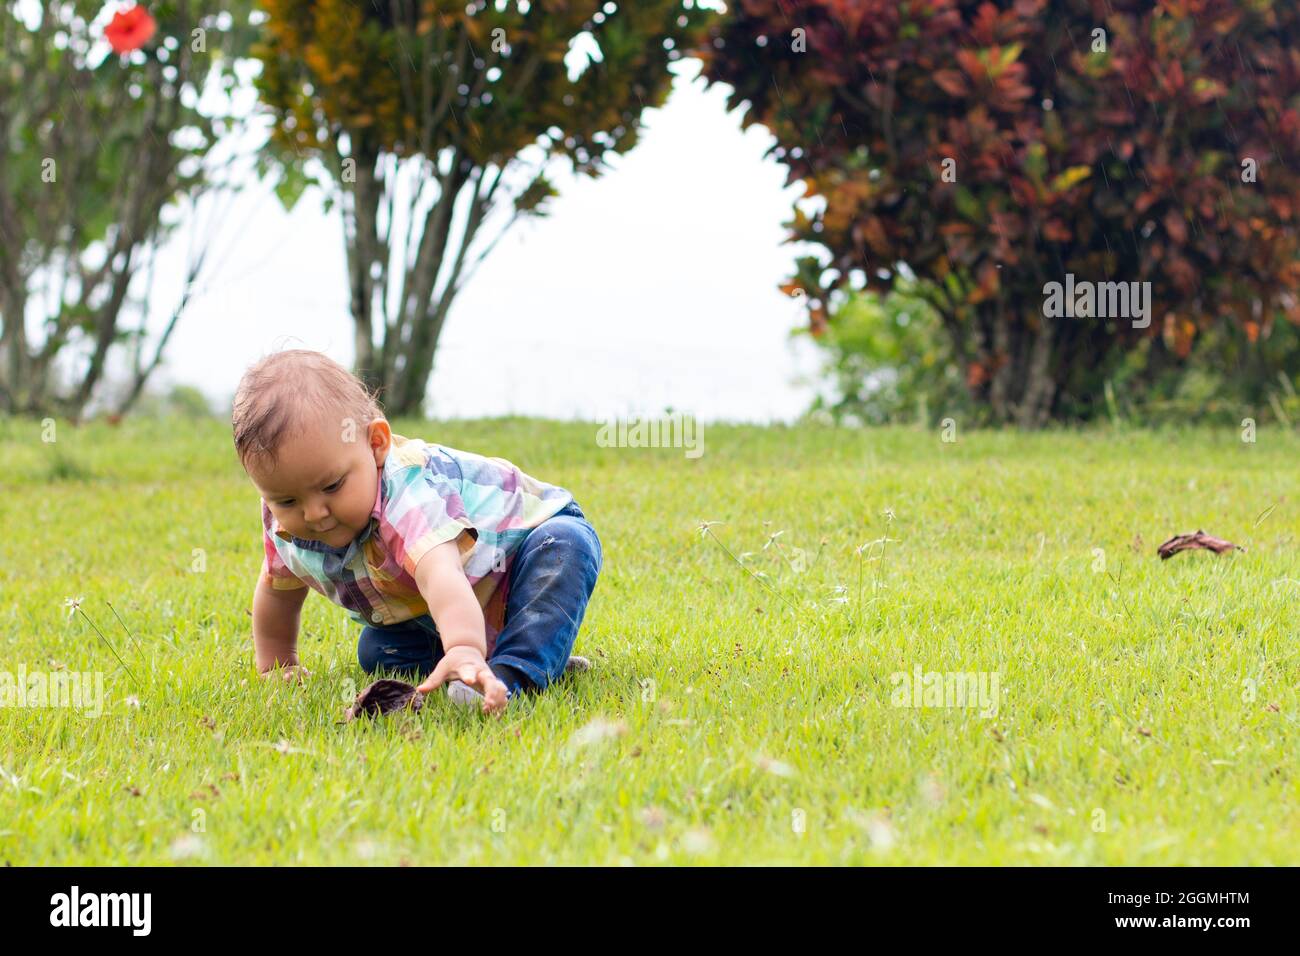 Baby playing alone on the grass of a park surrounded by nature.  Stock Photo